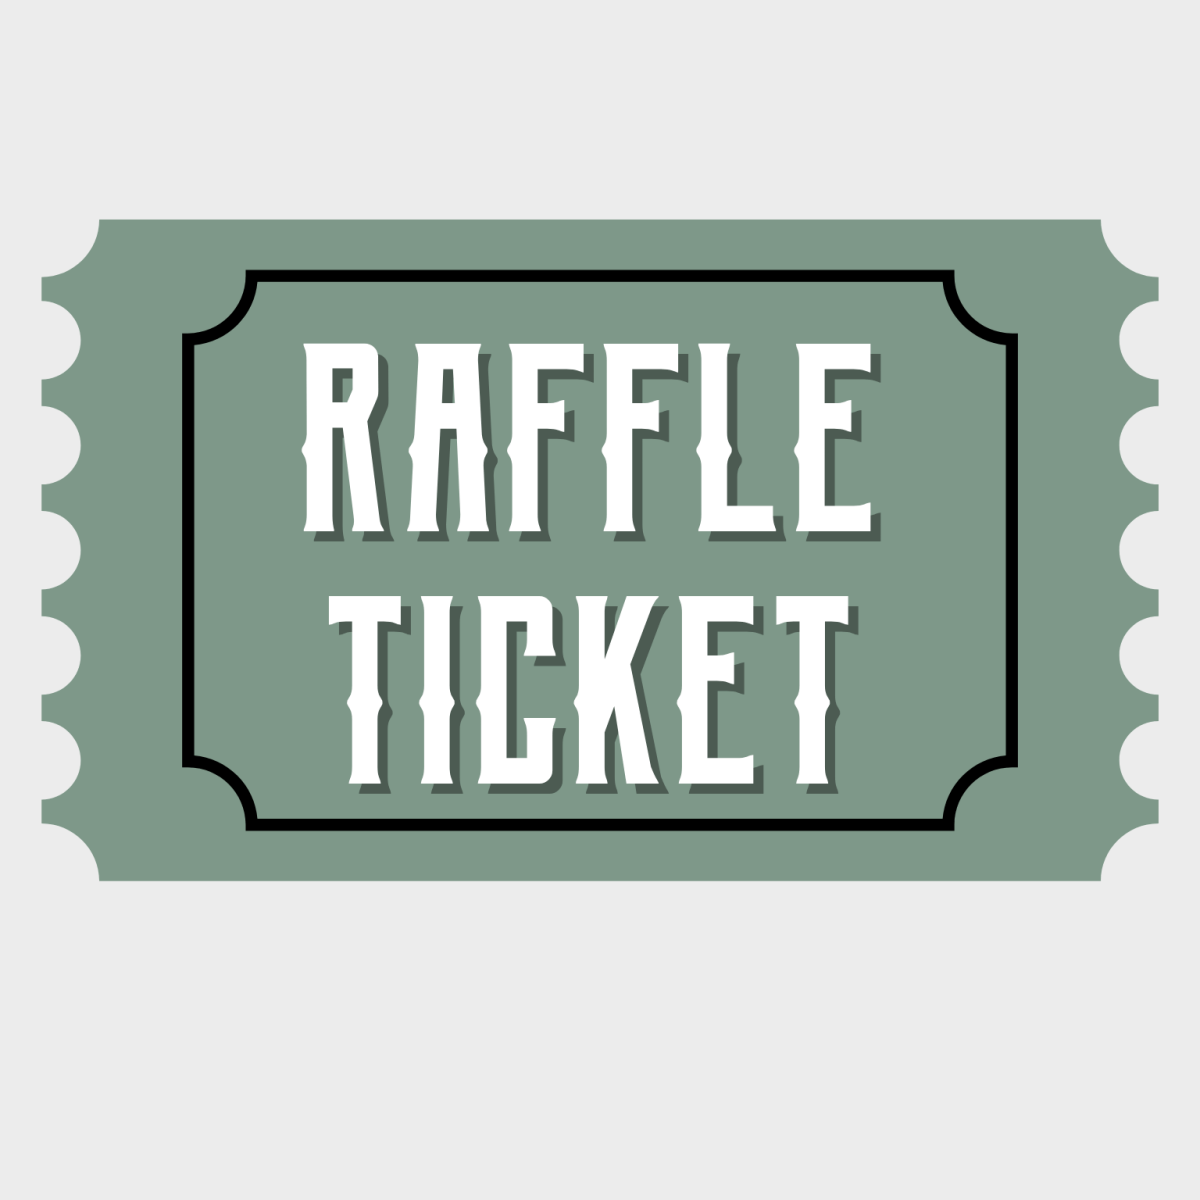 1 RAFFLE TICKET - CHANCE TO WIN NEW 42G CANNAMOLD, HUMIDOR & NATIVE LEAF WRAPS Purple Rose Supply blunt roller, cannagar mold, joint roller, blunt wrap, joint vs blunt, blunt vs joint, preroll, pre-roll, hemp wrap, hemp blunt